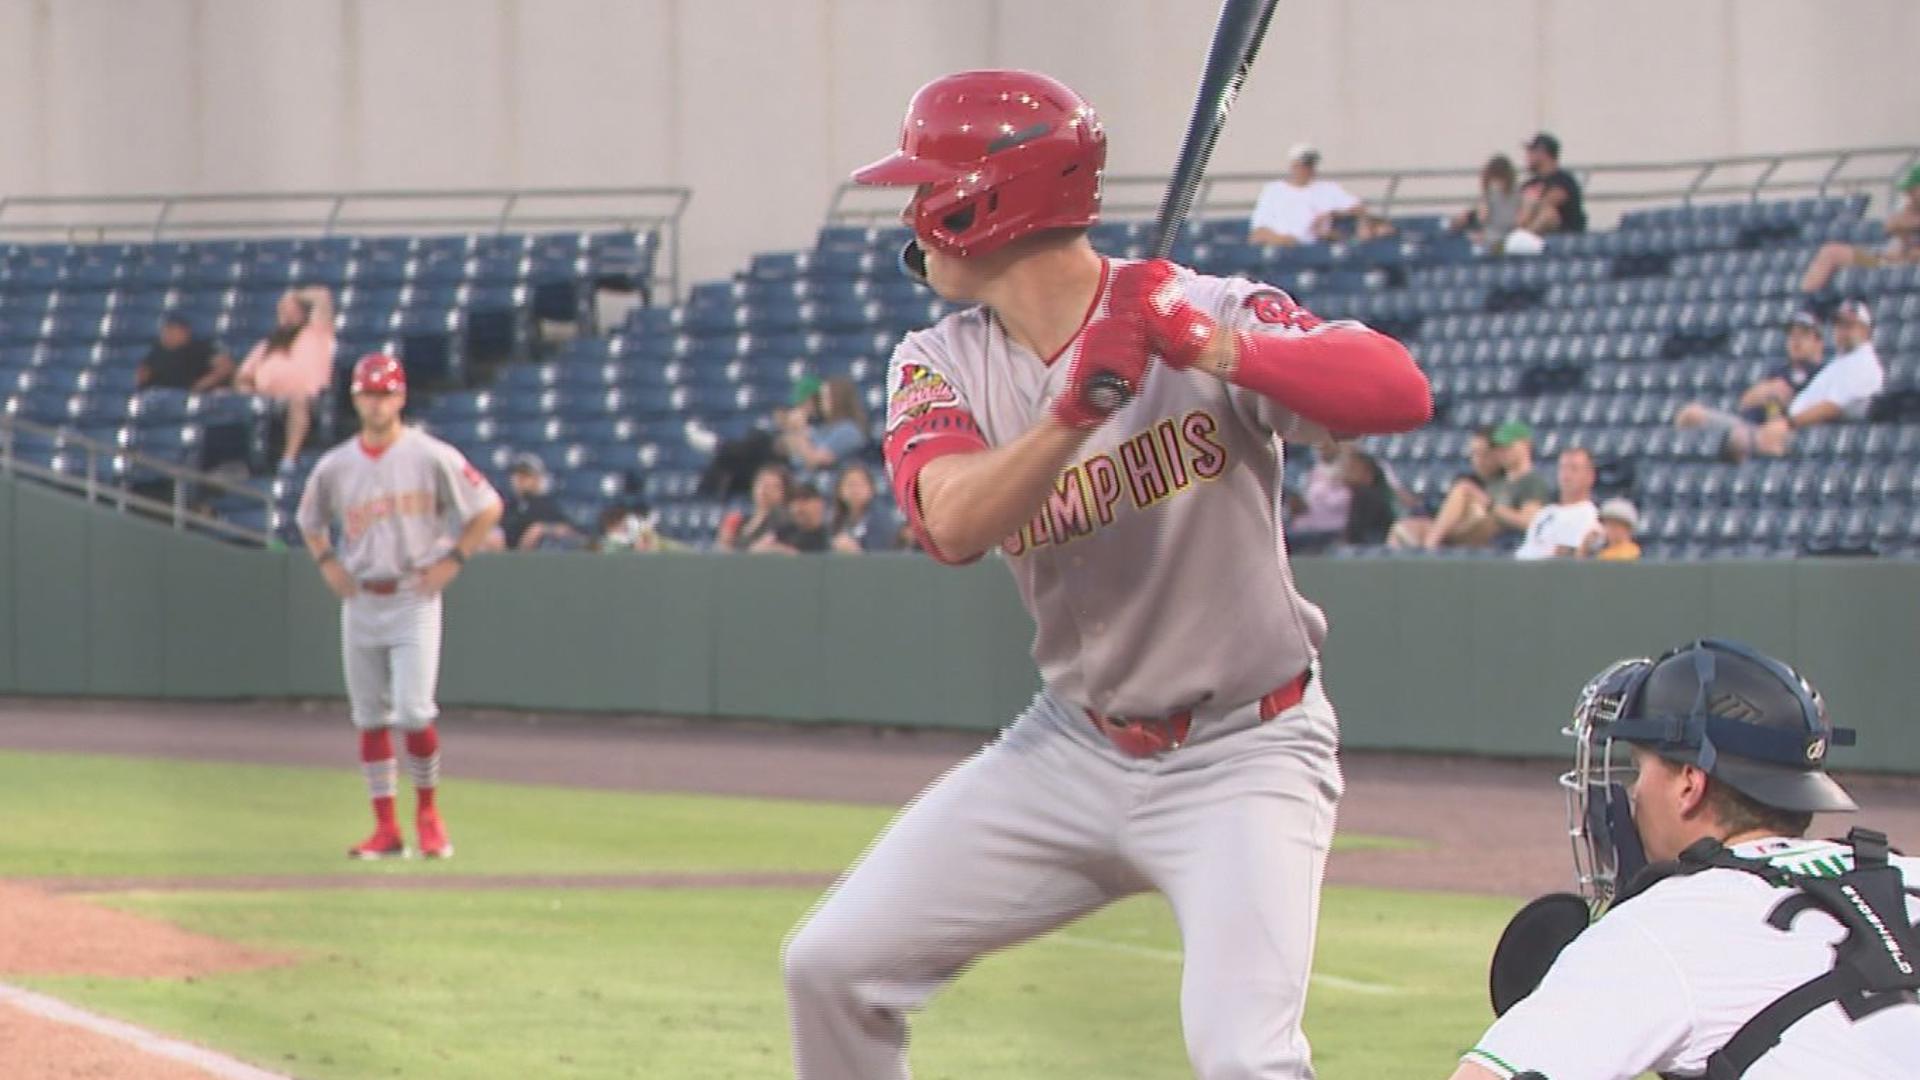 Former ODU great, Jared Young is back in Hampton Roads as a Memphis Redbird. In 8 years as a pro baseball player, this is his 7th minor league team.